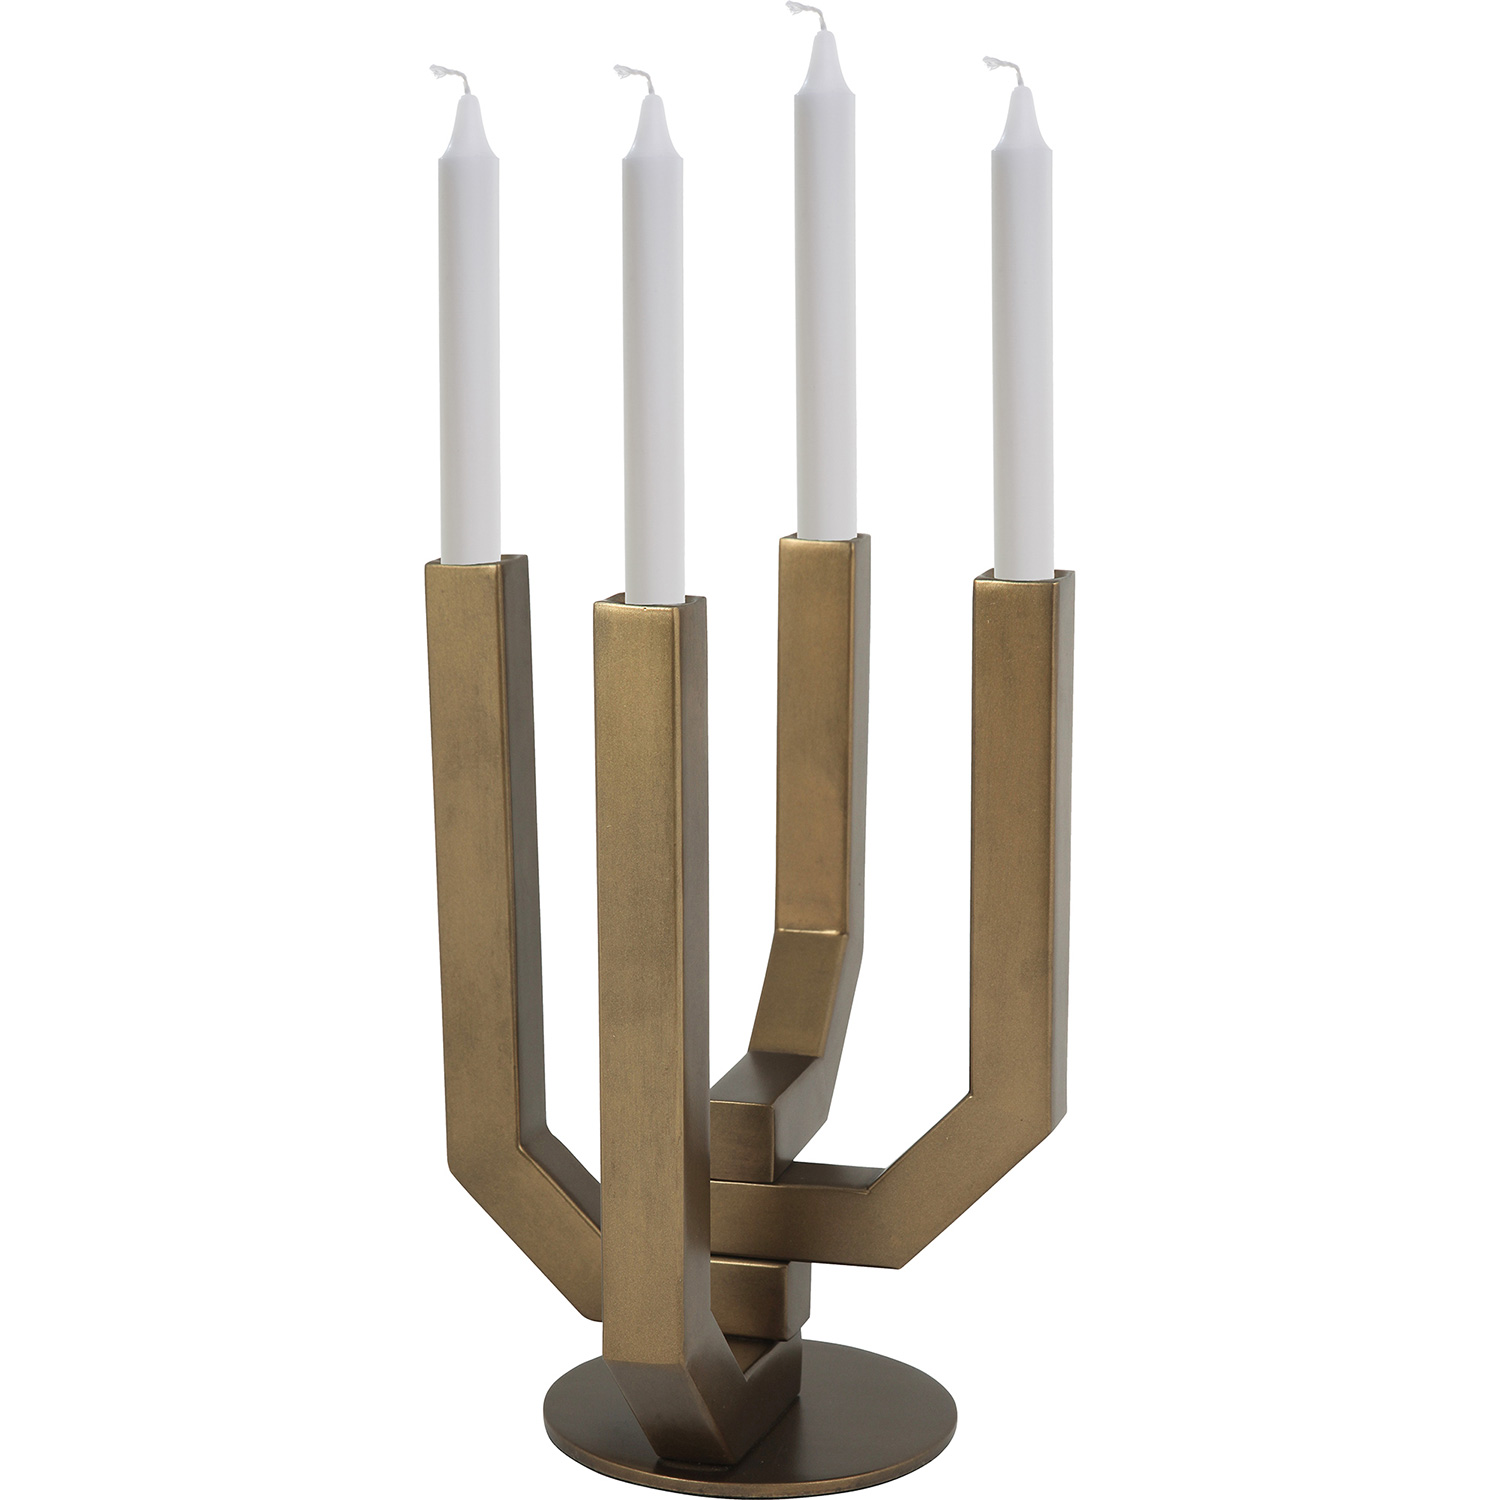 Ren-Wil Nyx Candle Holder - Antique Brass